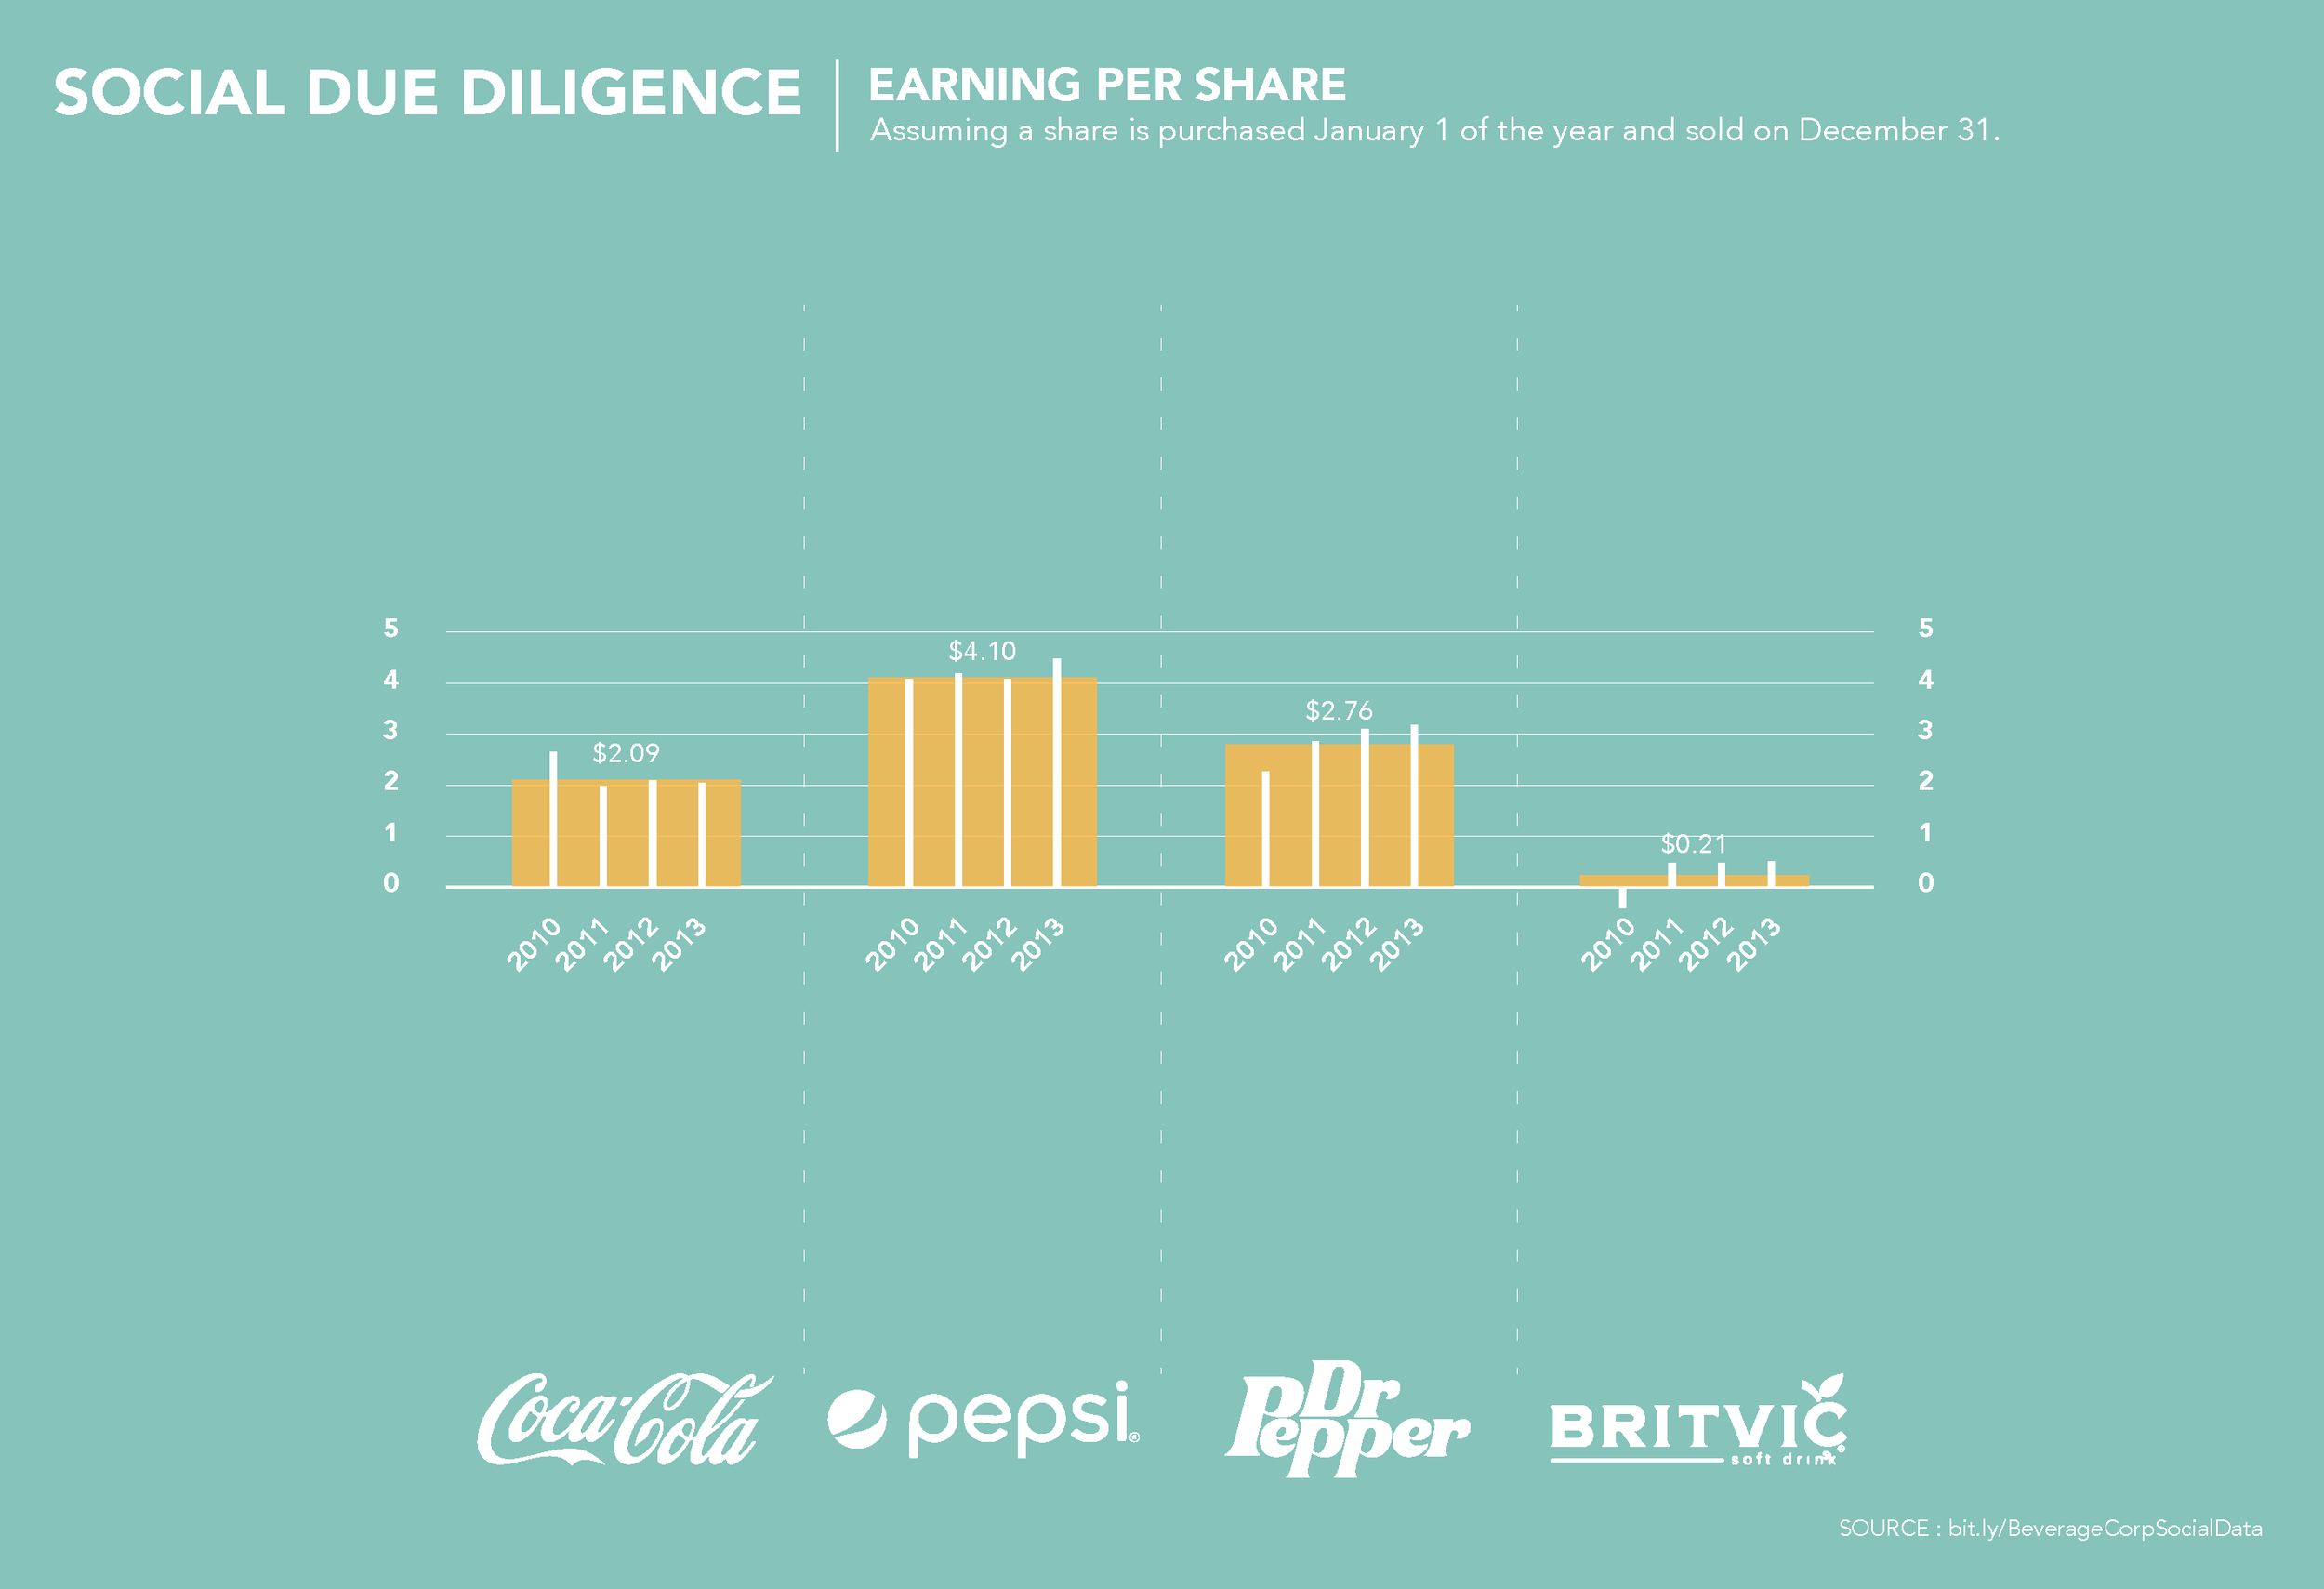   We begin with earnings per share of stock in each company.    For comparison sake, this assumes a share of stock purchased January 1 and sold December 31    This graph demonstrates the financial earnings an investor would make per share of stock.  